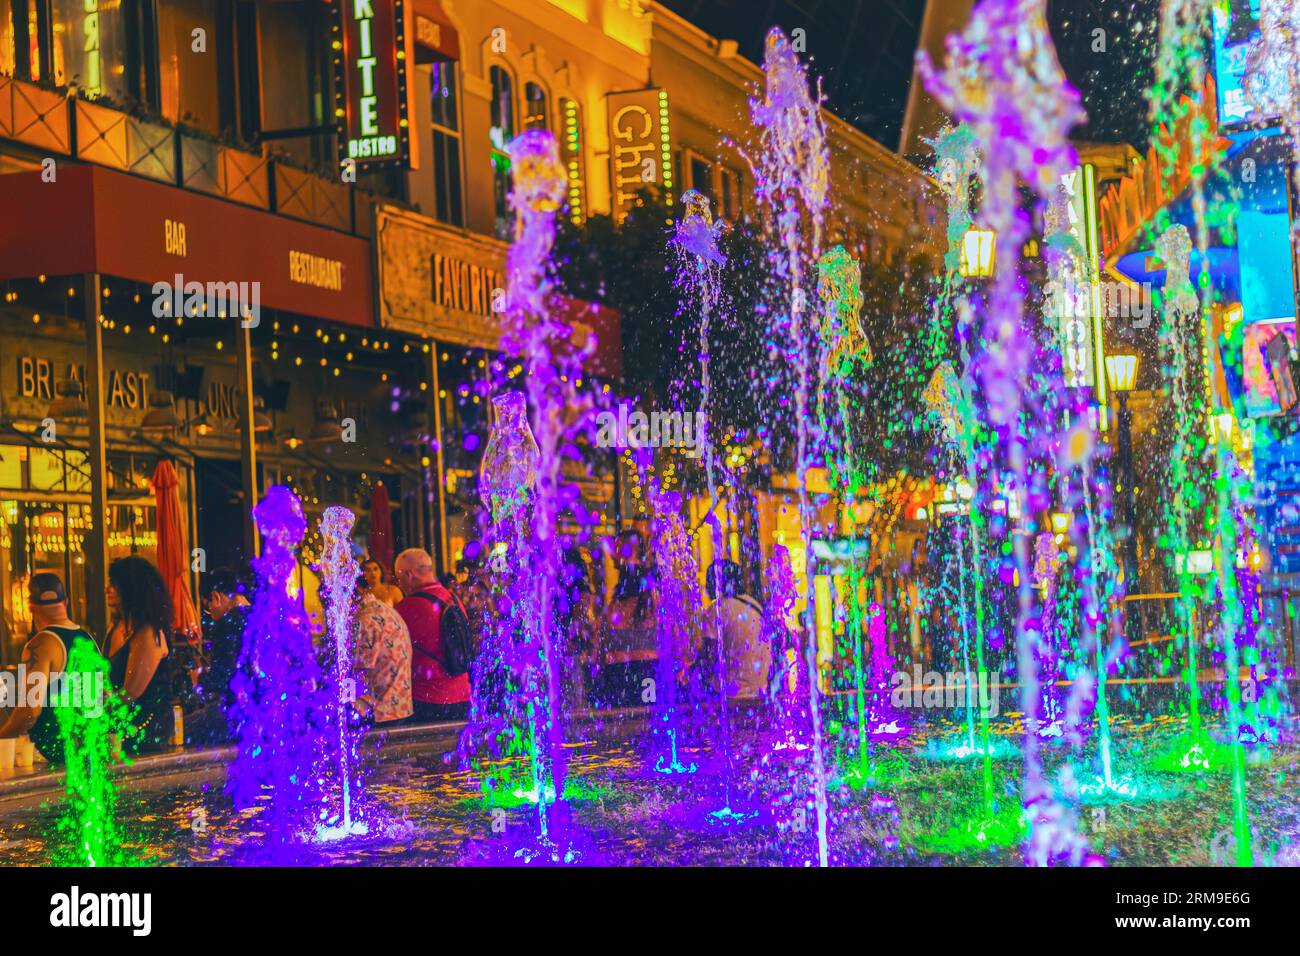 Experience the dazzling spectacle of dancing water jets, captured in a colorful nighttime photograph next to In-N-Out at The LINQ Promenade in Las Veg Stock Photo